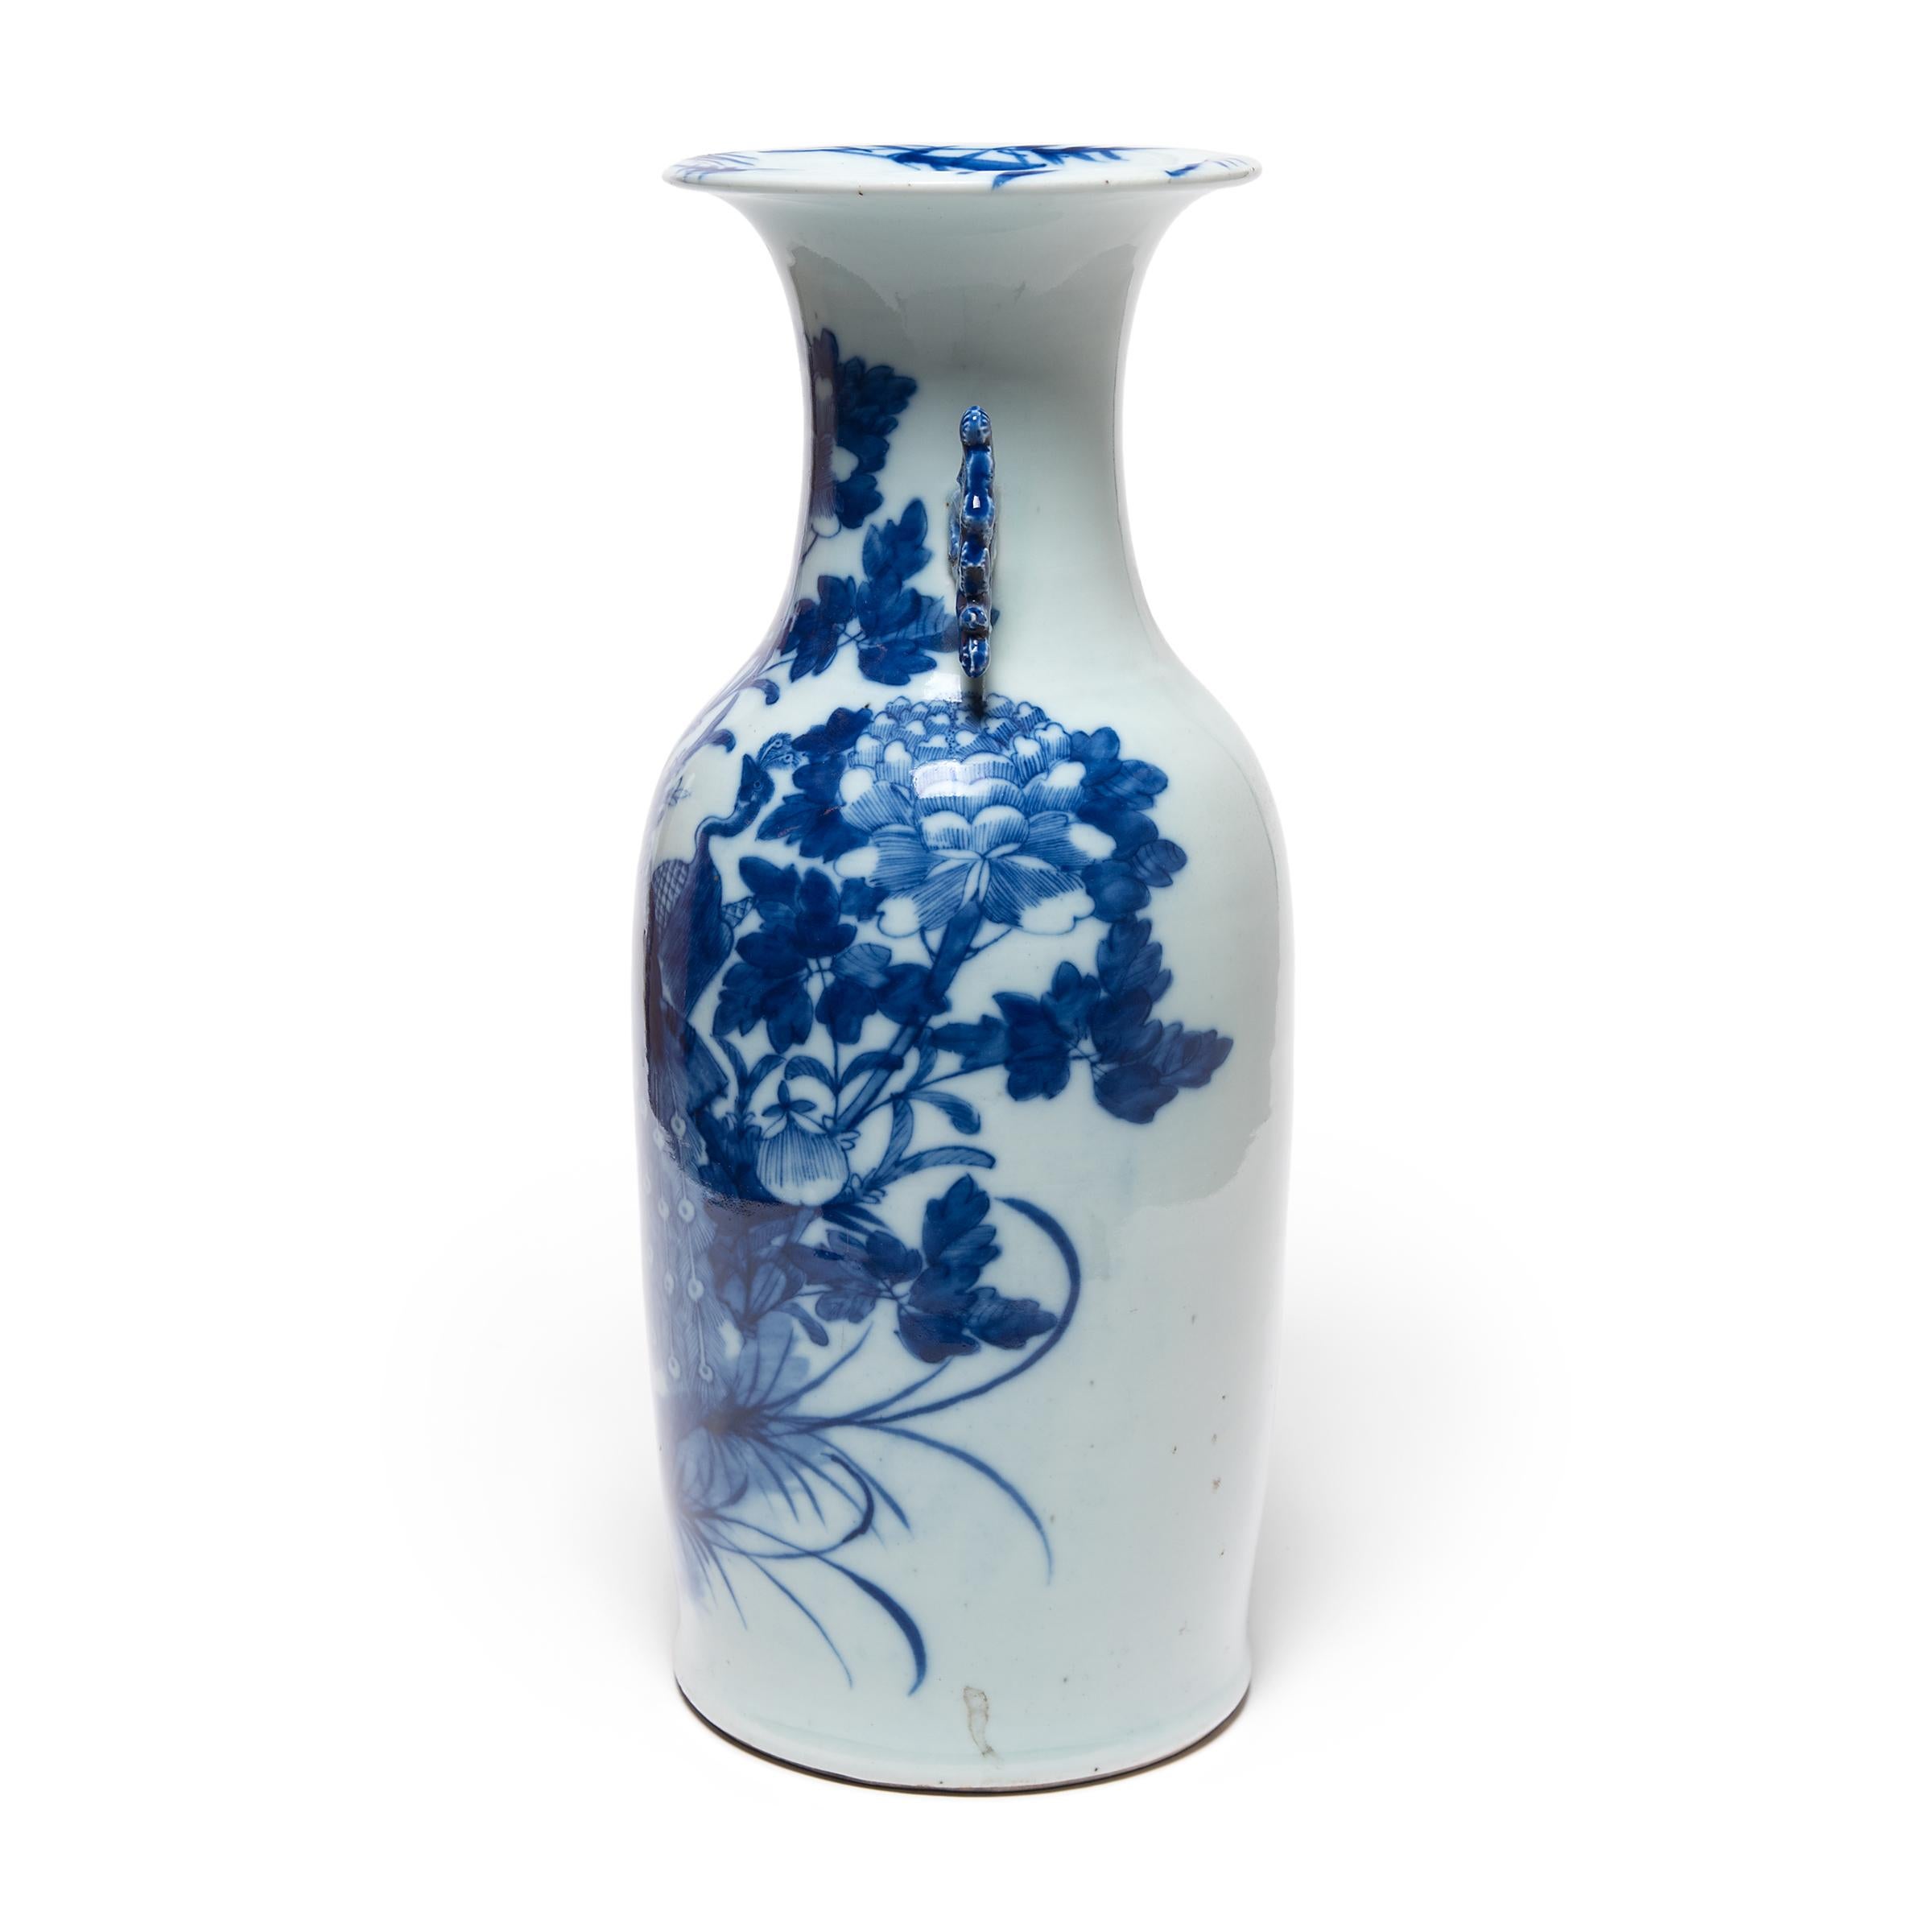 This 20th-century porcelain vase is an exquisite example of Chinese blue-and-white pottery. The vase is expertly formed with thin walls, widening to a flared lip and flanked by two molded scroll handles. Painted with richly saturated cobalt